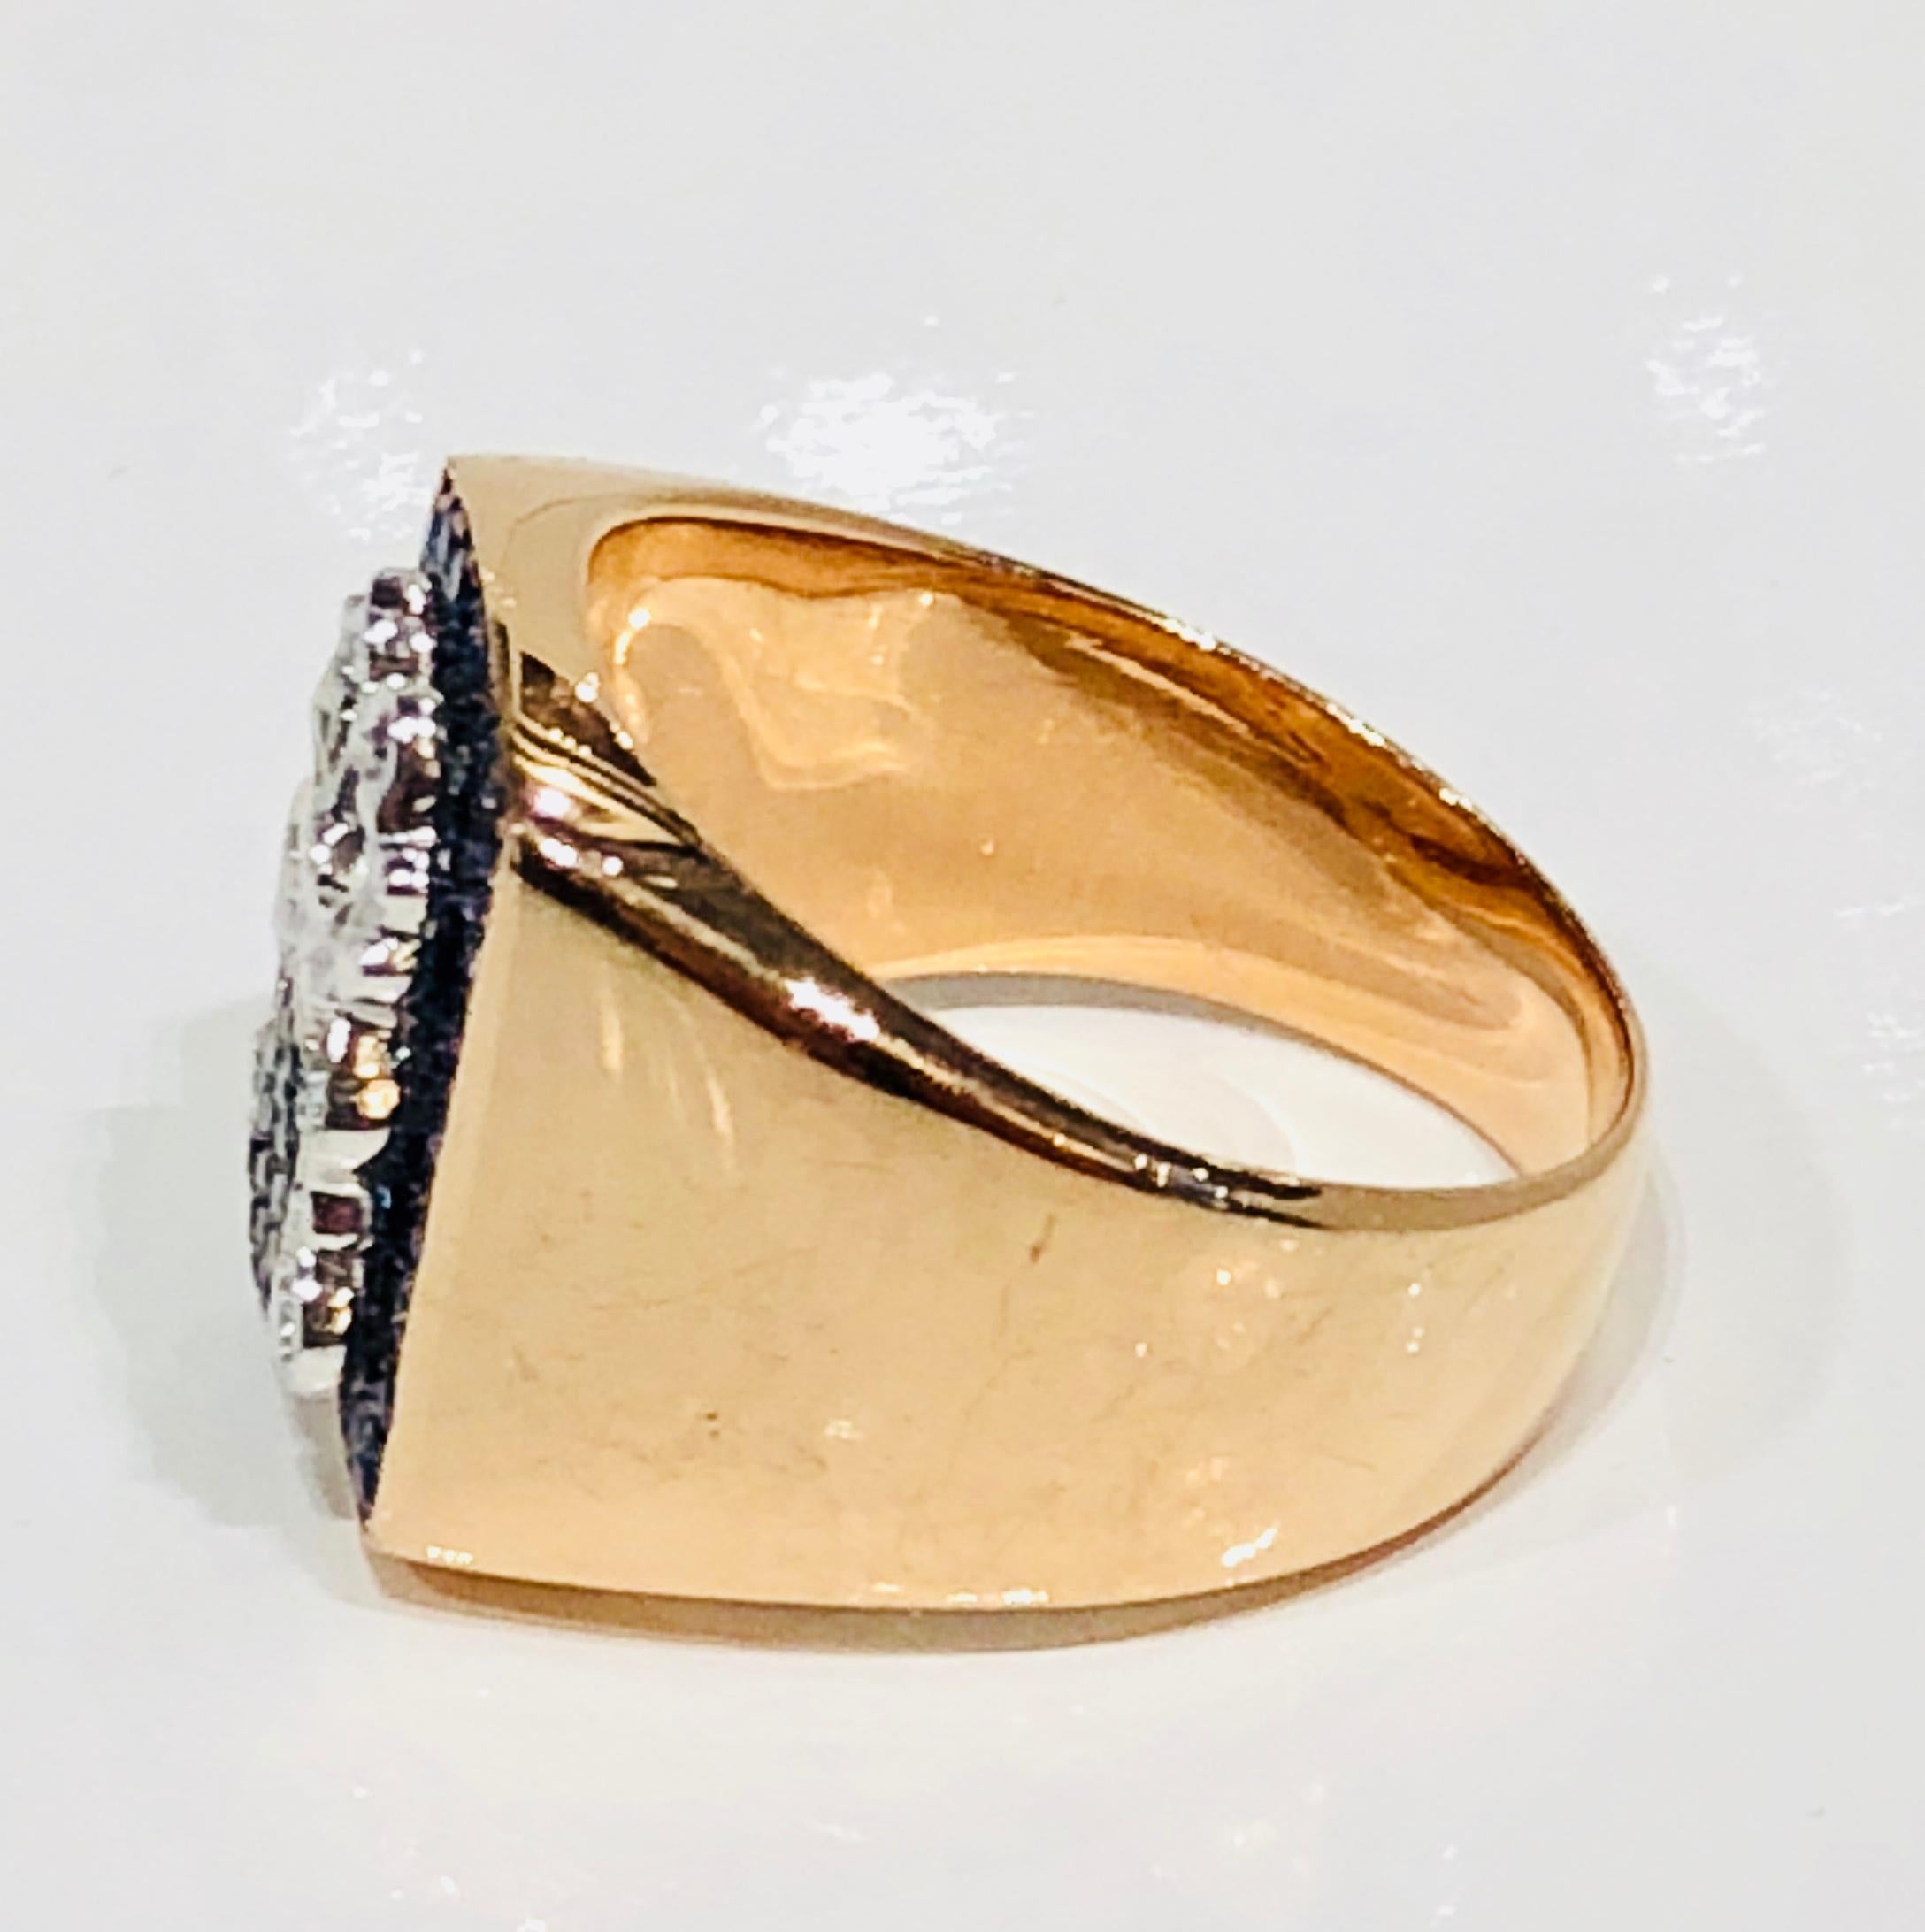 Unisex 18k rose gold Signet Ring with pave set sapphire plateau and black and white diamond set shield motif 
Designed by Martyn Lawrence Bullard
Can be make in any size, lead time 4 weeks